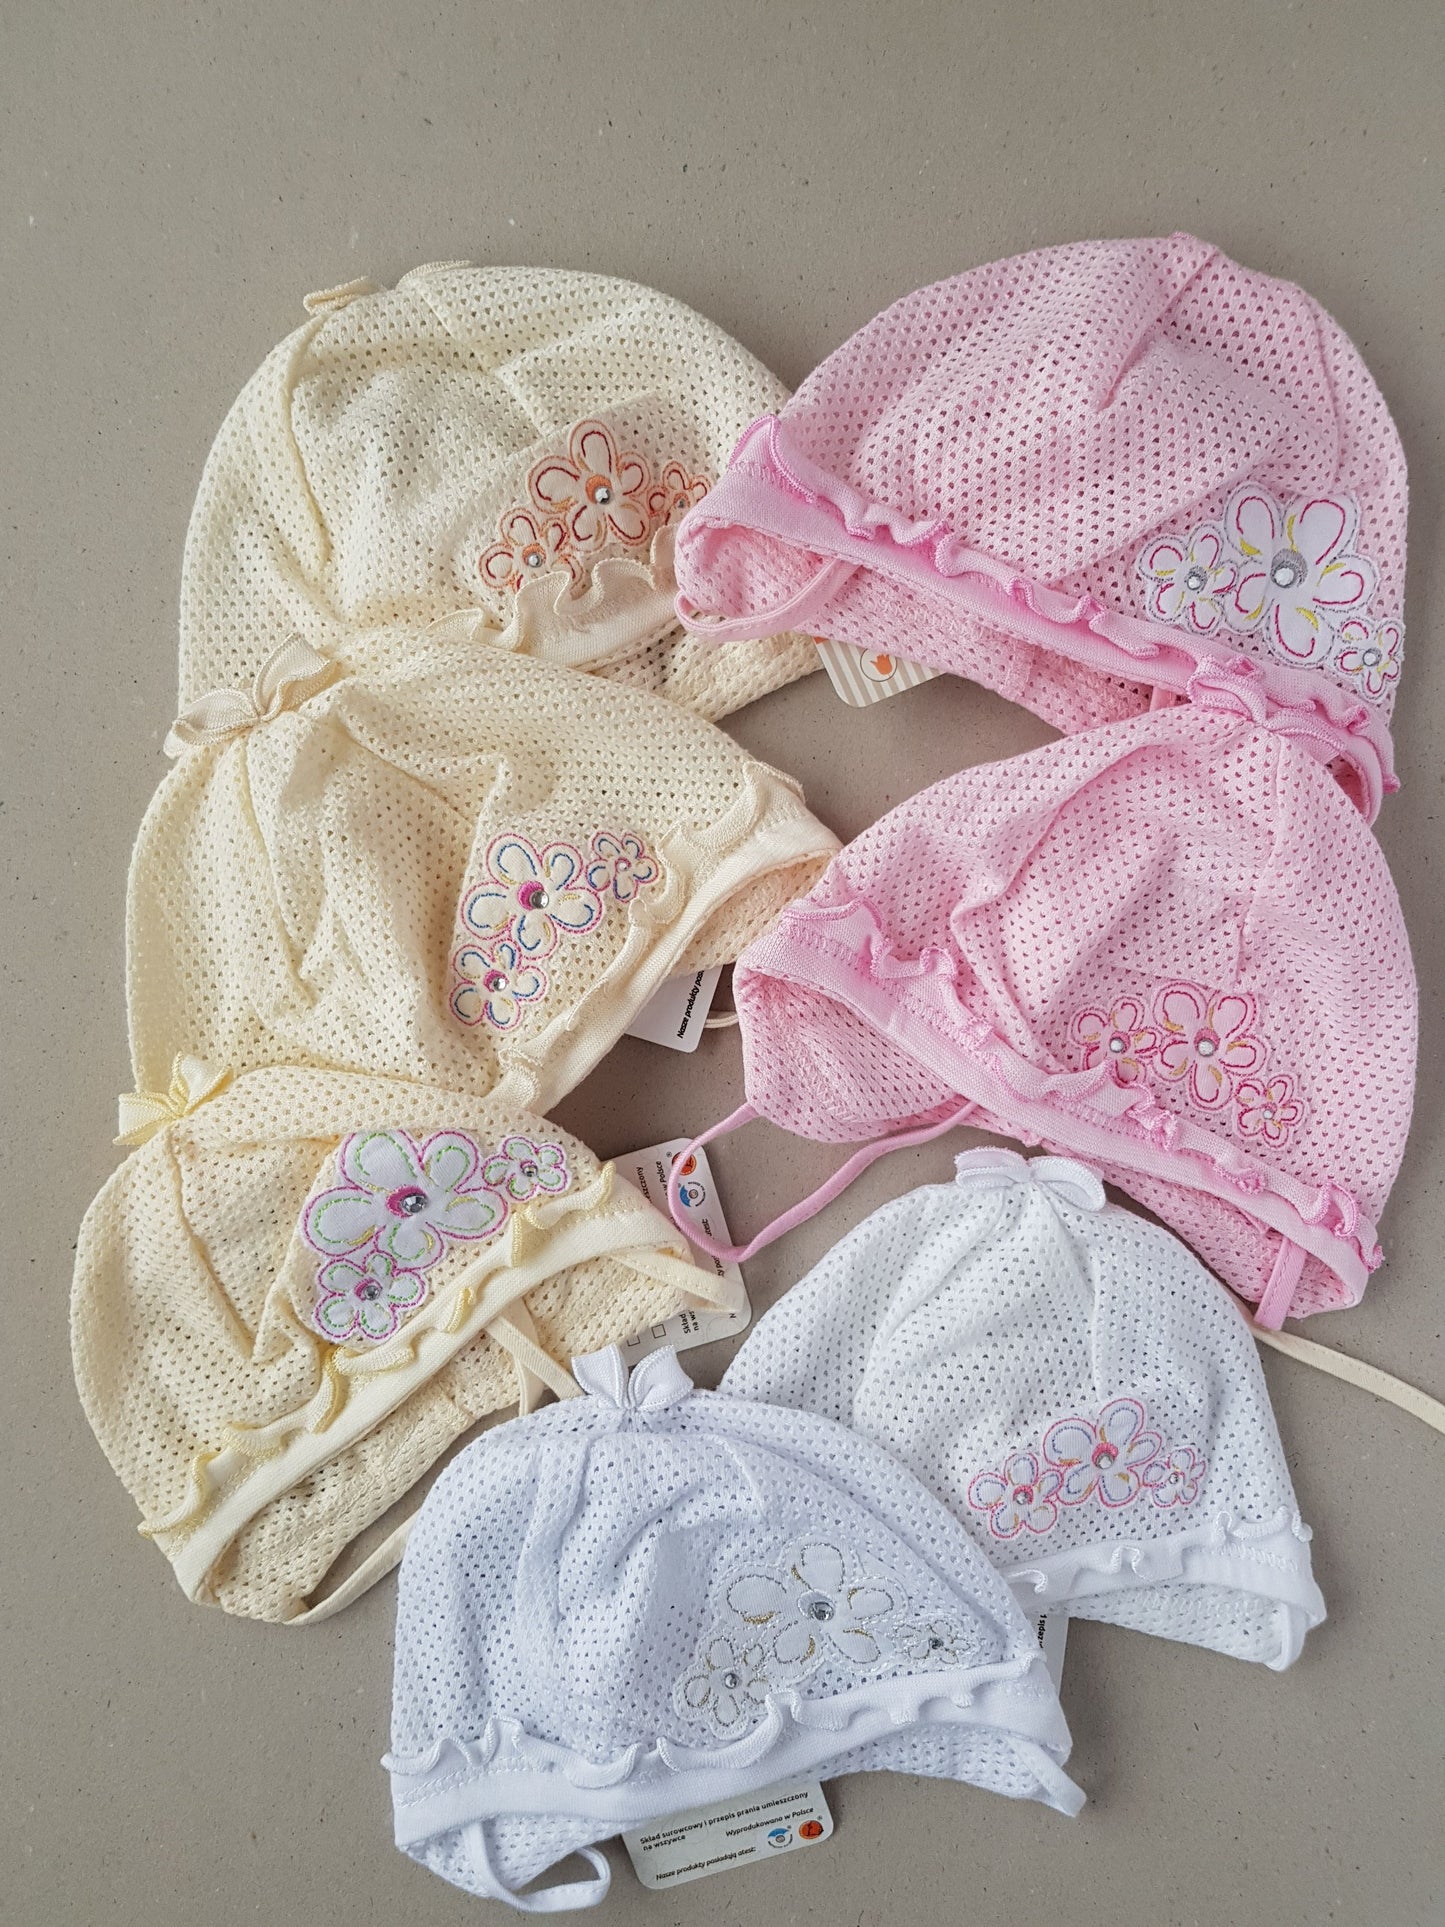 Mesh baby girl summer hats in white, cream and pink